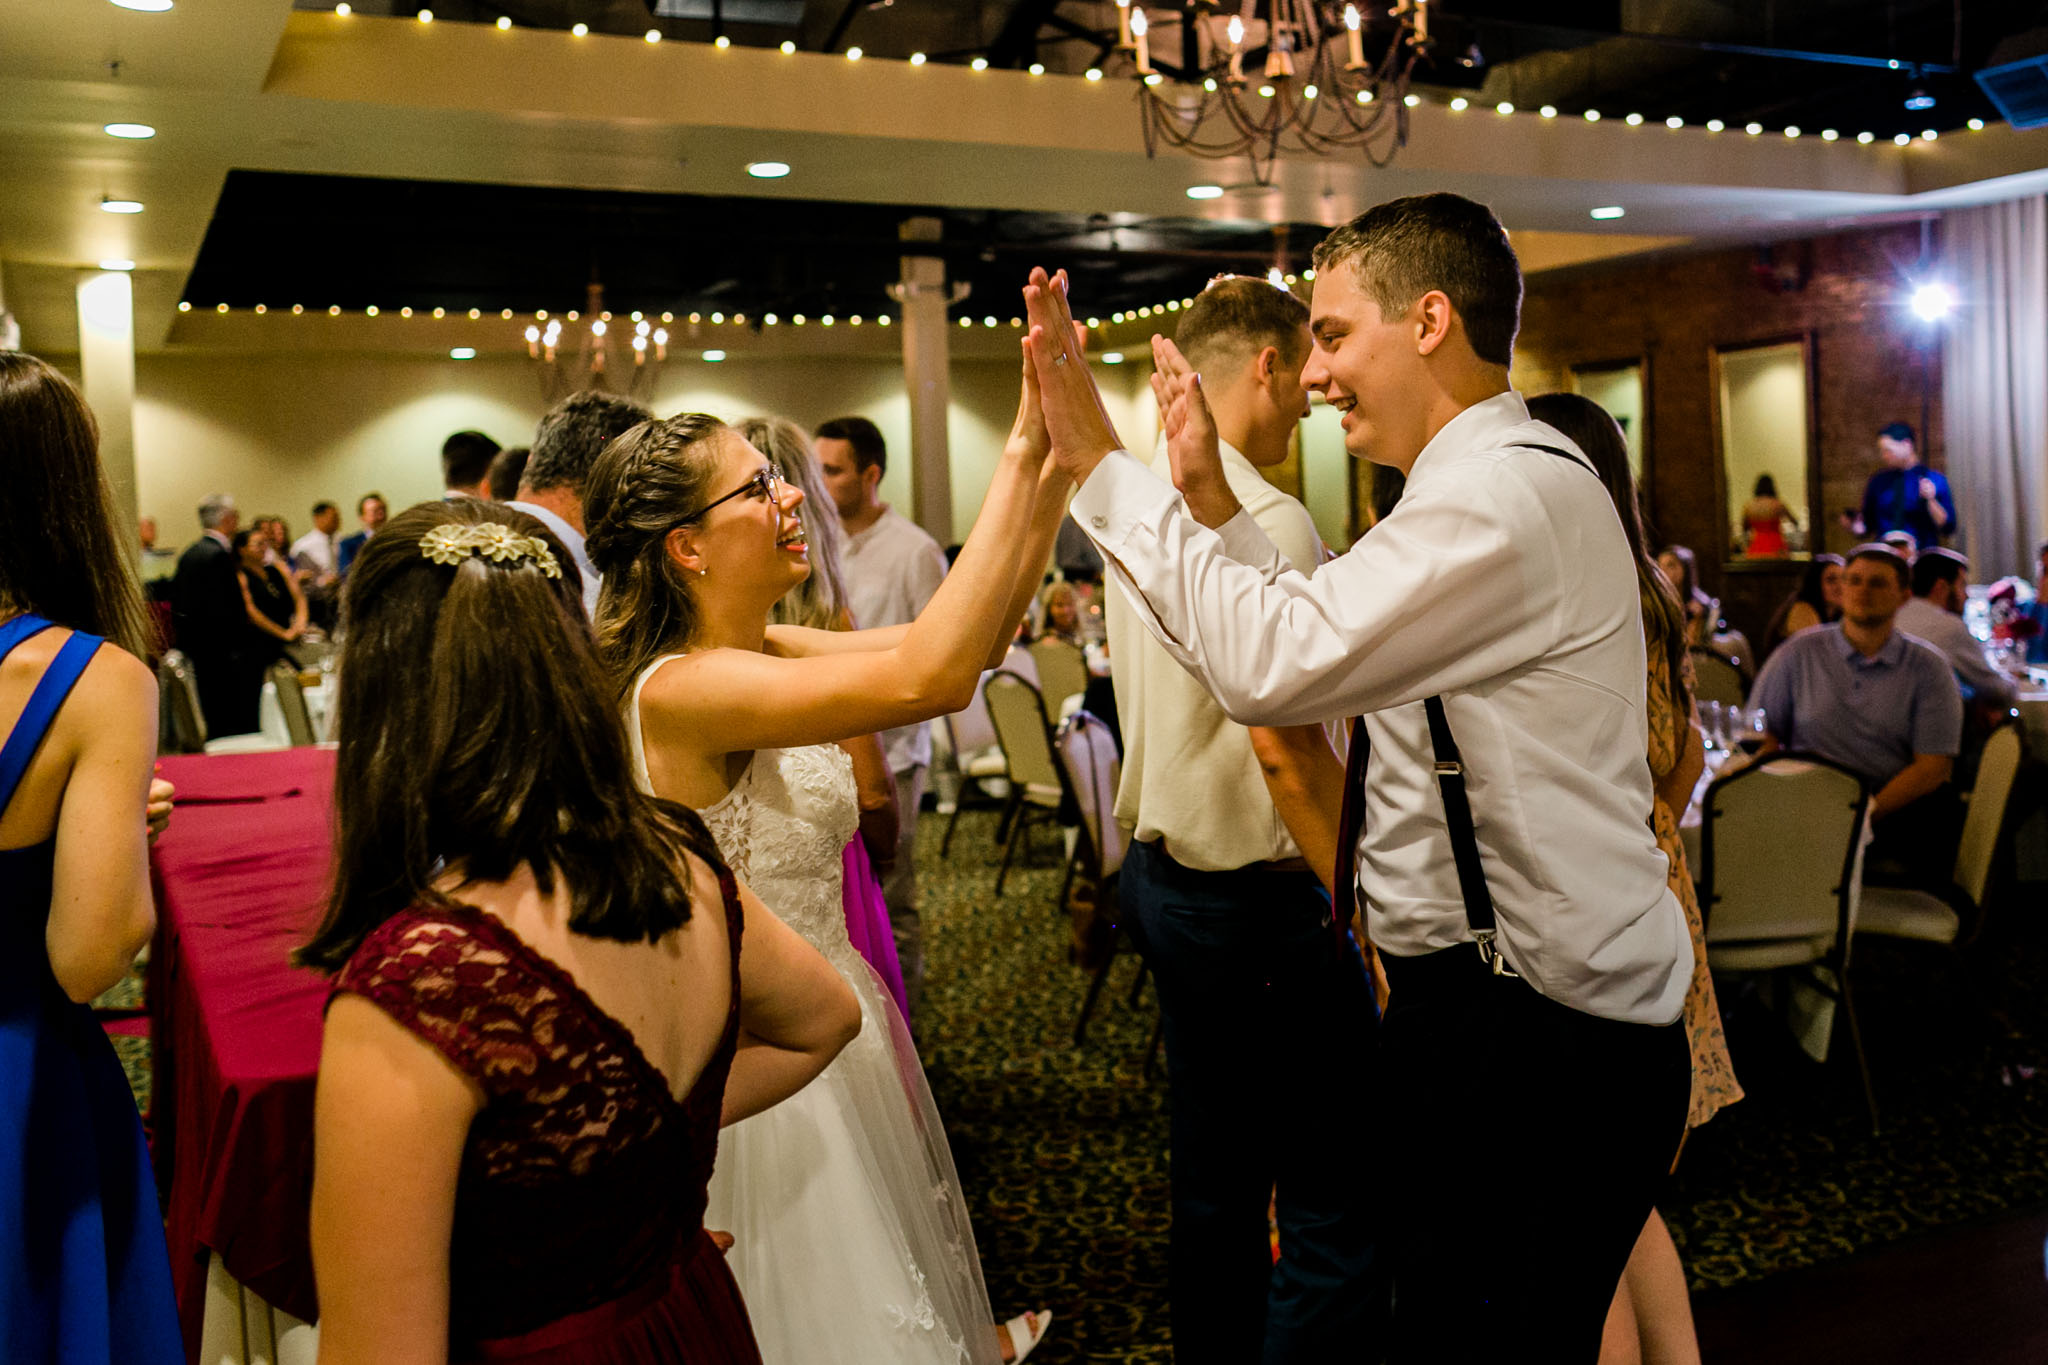 Bride and groom giving each other high fives |People dancing at wedding reception at Royal Banquet Conference Center | Raleigh Wedding Photographer | By G. Lin Photography